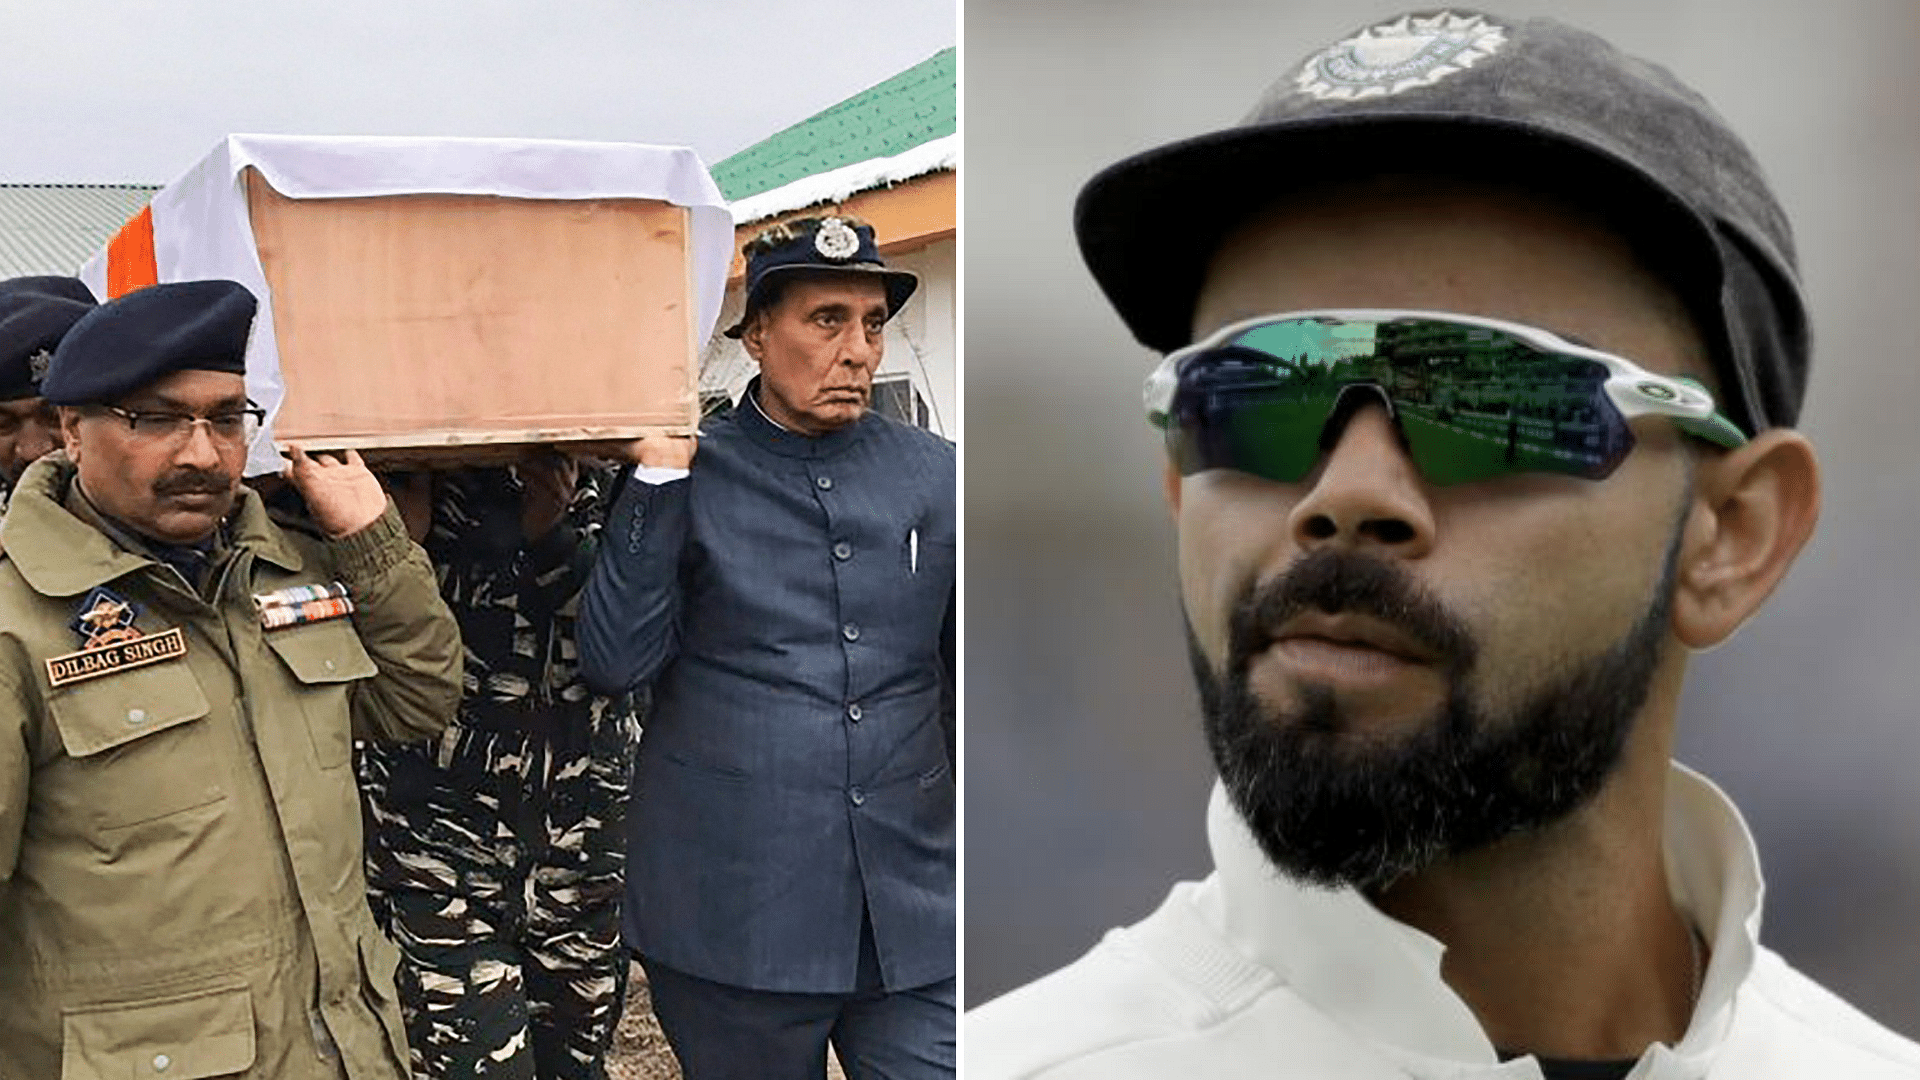 Indian captain Virat Kohli announced the postponement of the Indian Sports Honours in light of the terror attack which martyred 40 CRPF jawans in Pulwama.